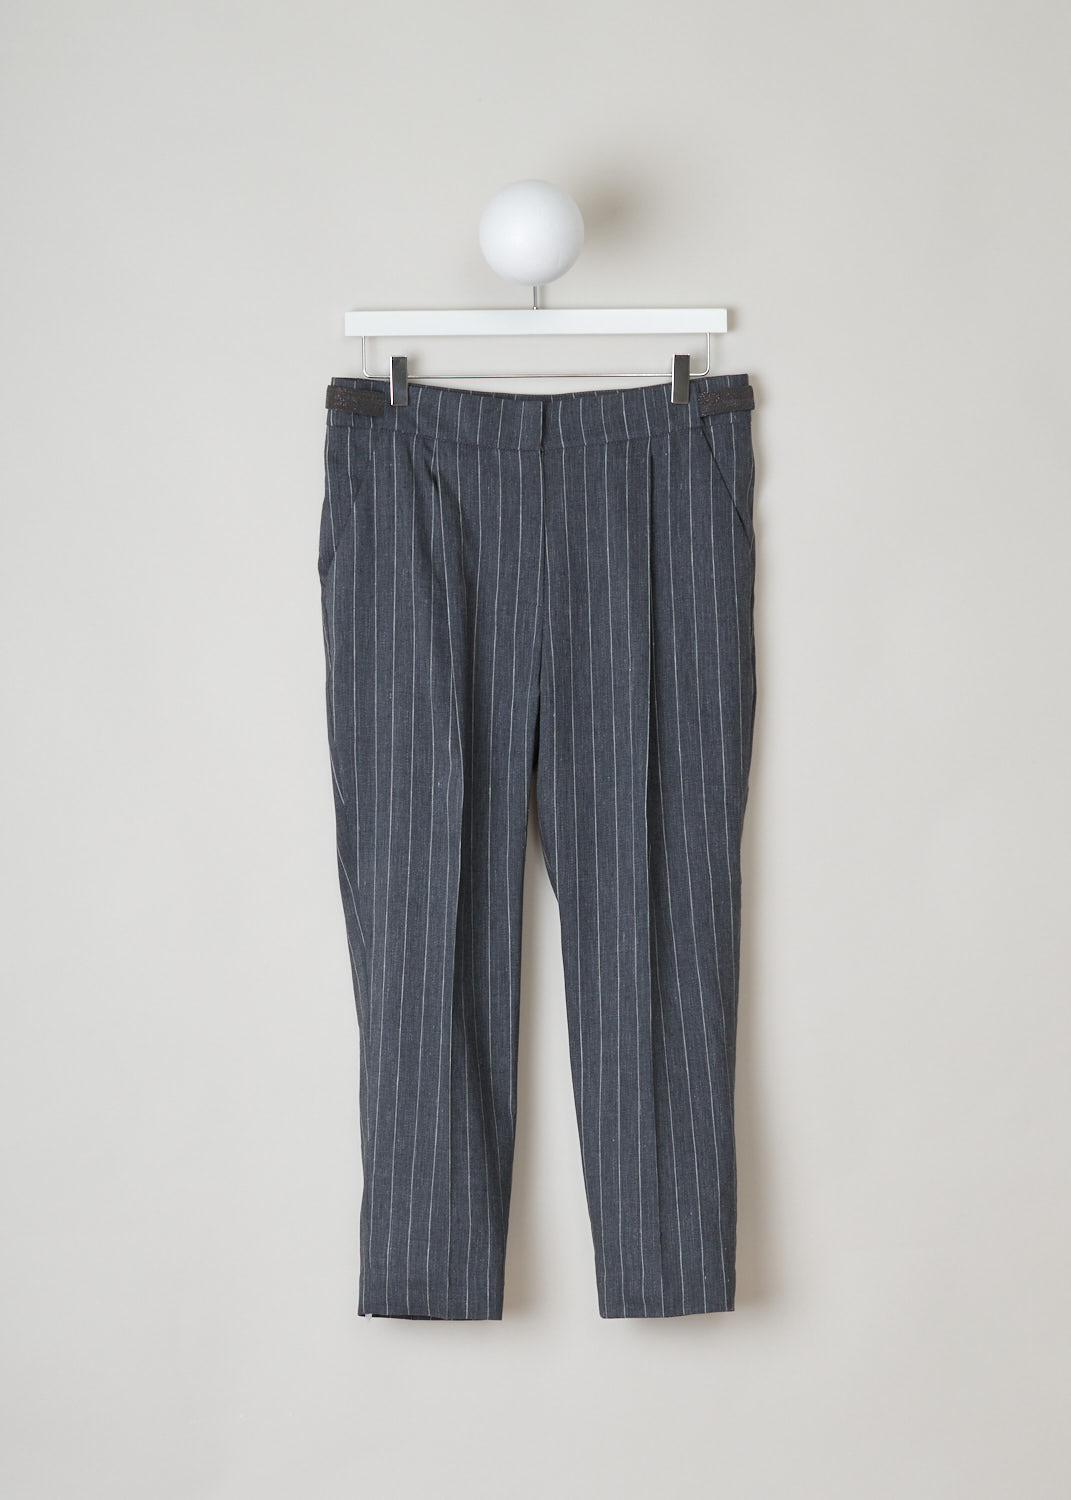 Brunello Cucinelli, mid grey pinstripe pants, MF554P6492_C002, grey white, front, Mid grey pants, made of a pinstripe fabric. A notable feature of this model are the side tabs, that are used instead of belt loops. Furthermore, this model has a wide fit and a cropped length. The attachment options on this model are metal clips, a zipper and a French bearer button.